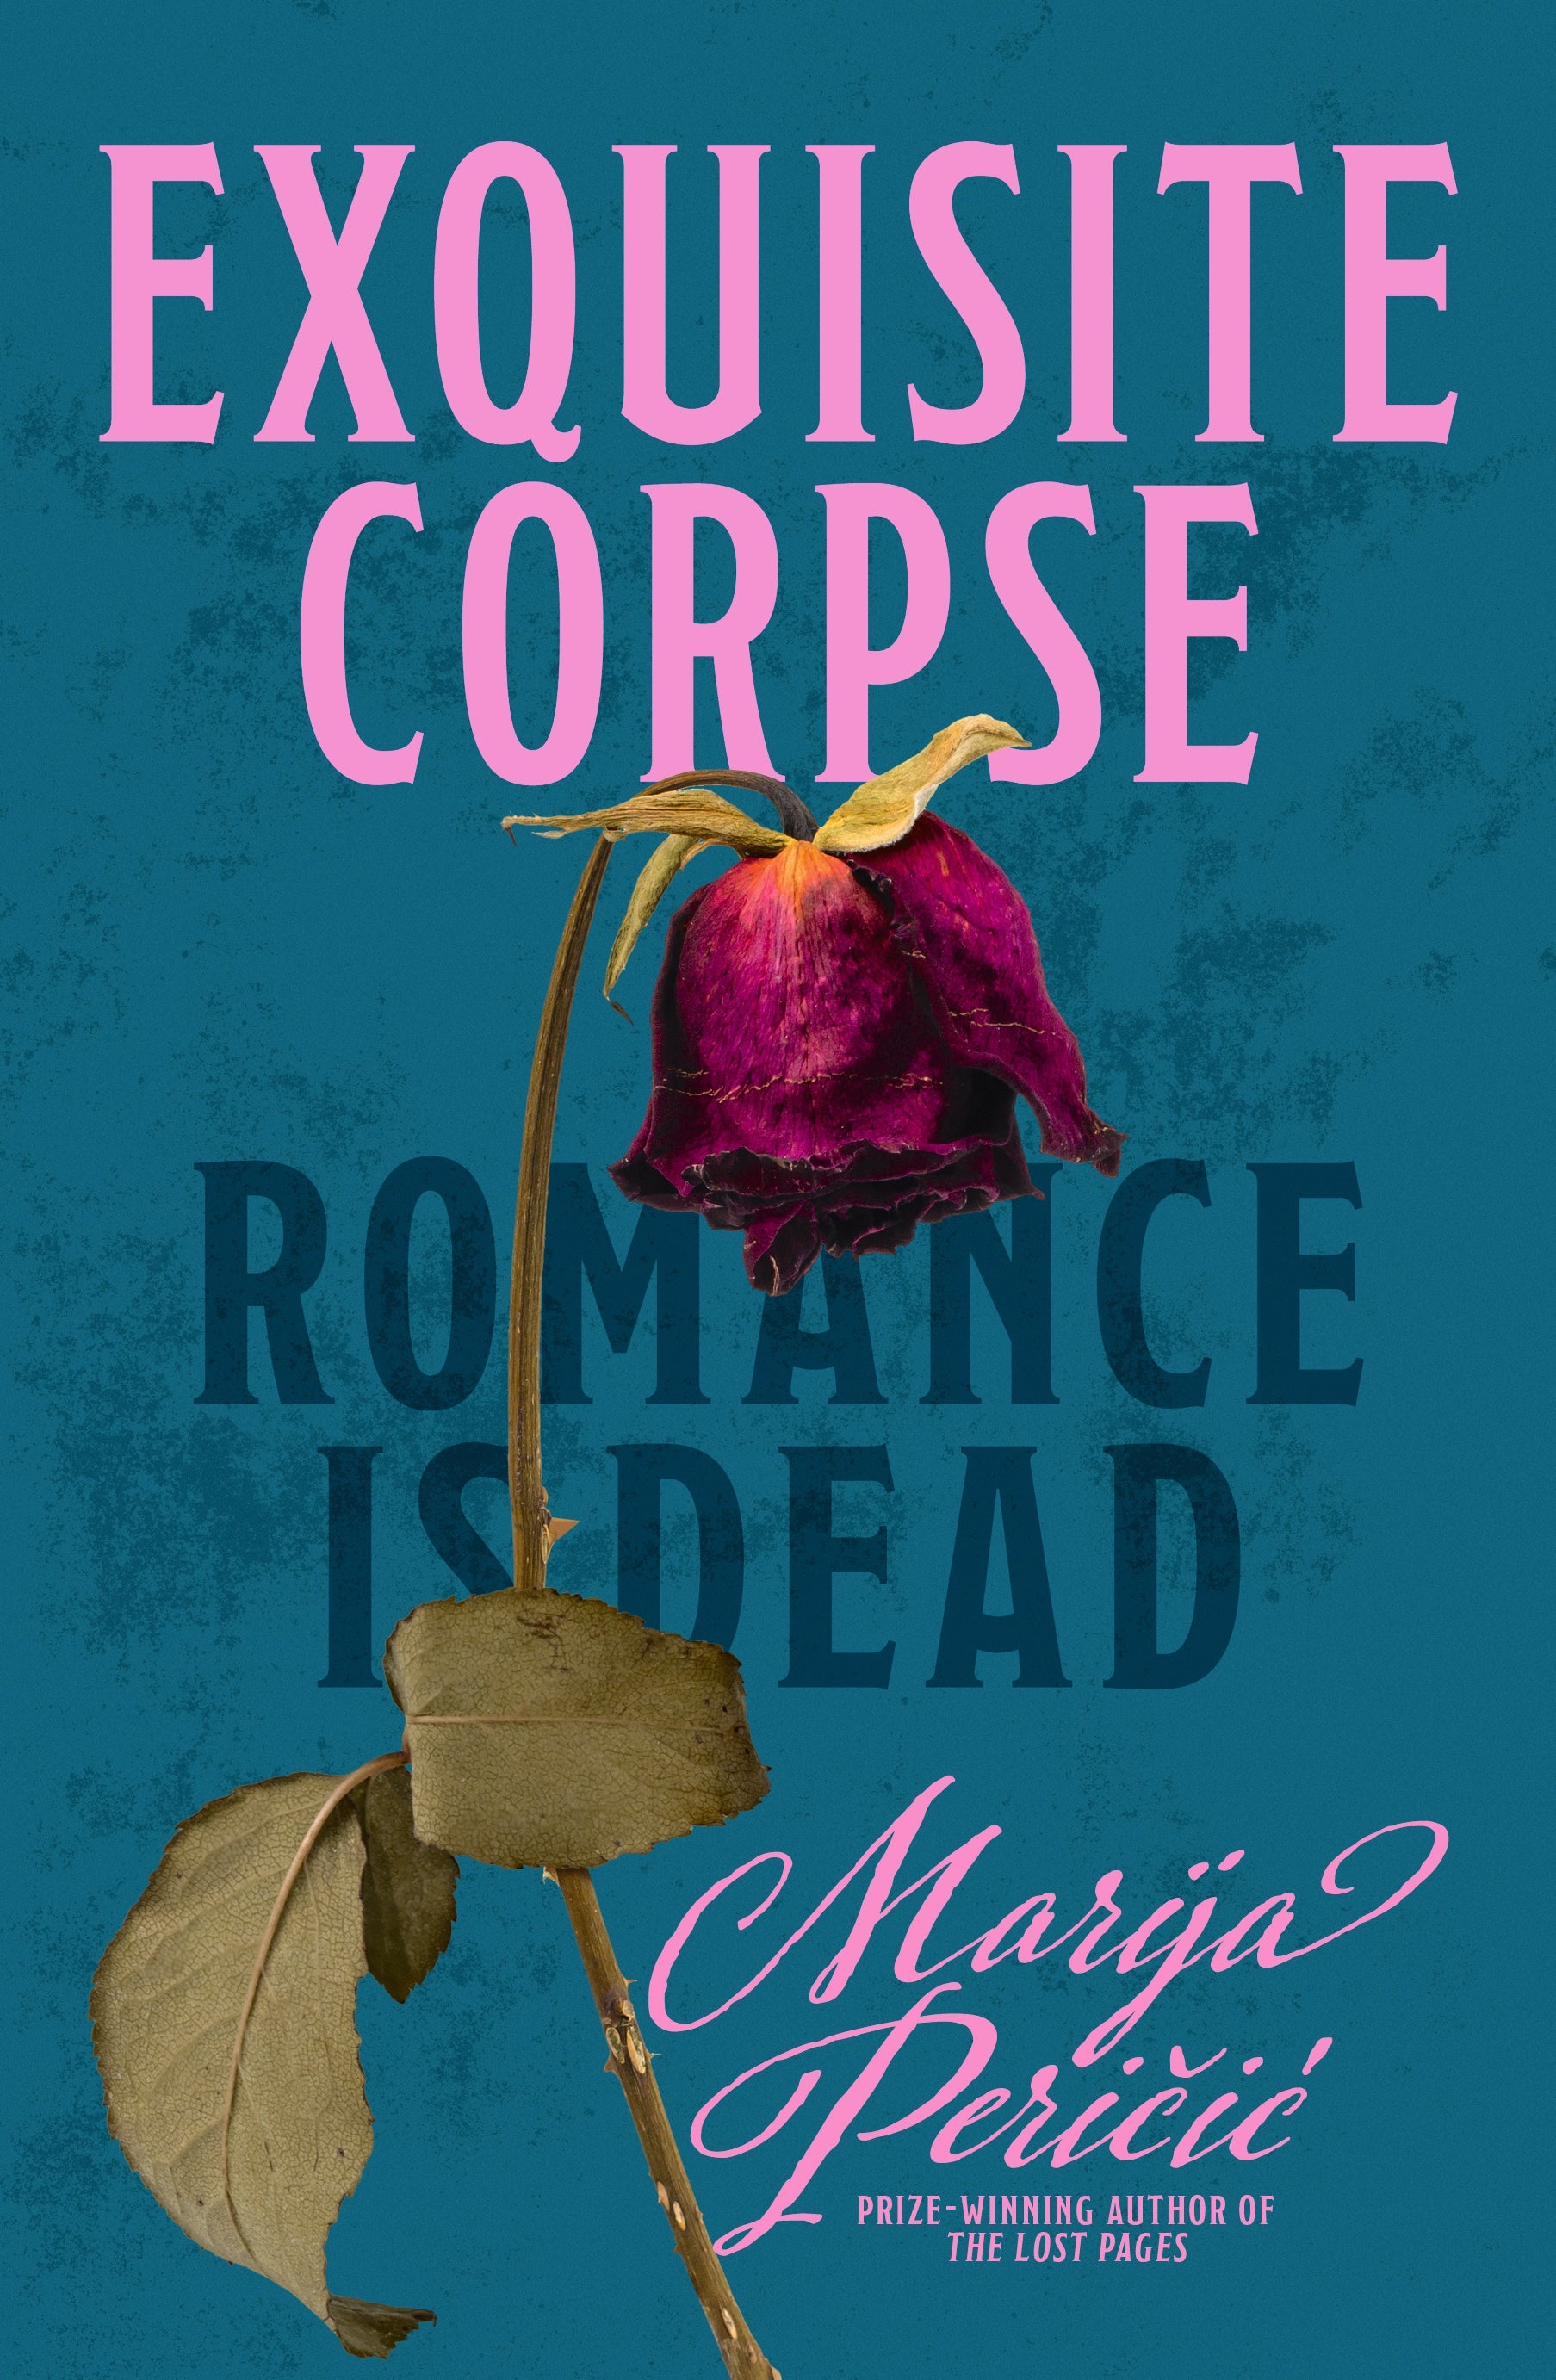 A book cover showing a wilting red rose and pink text on a blue background.